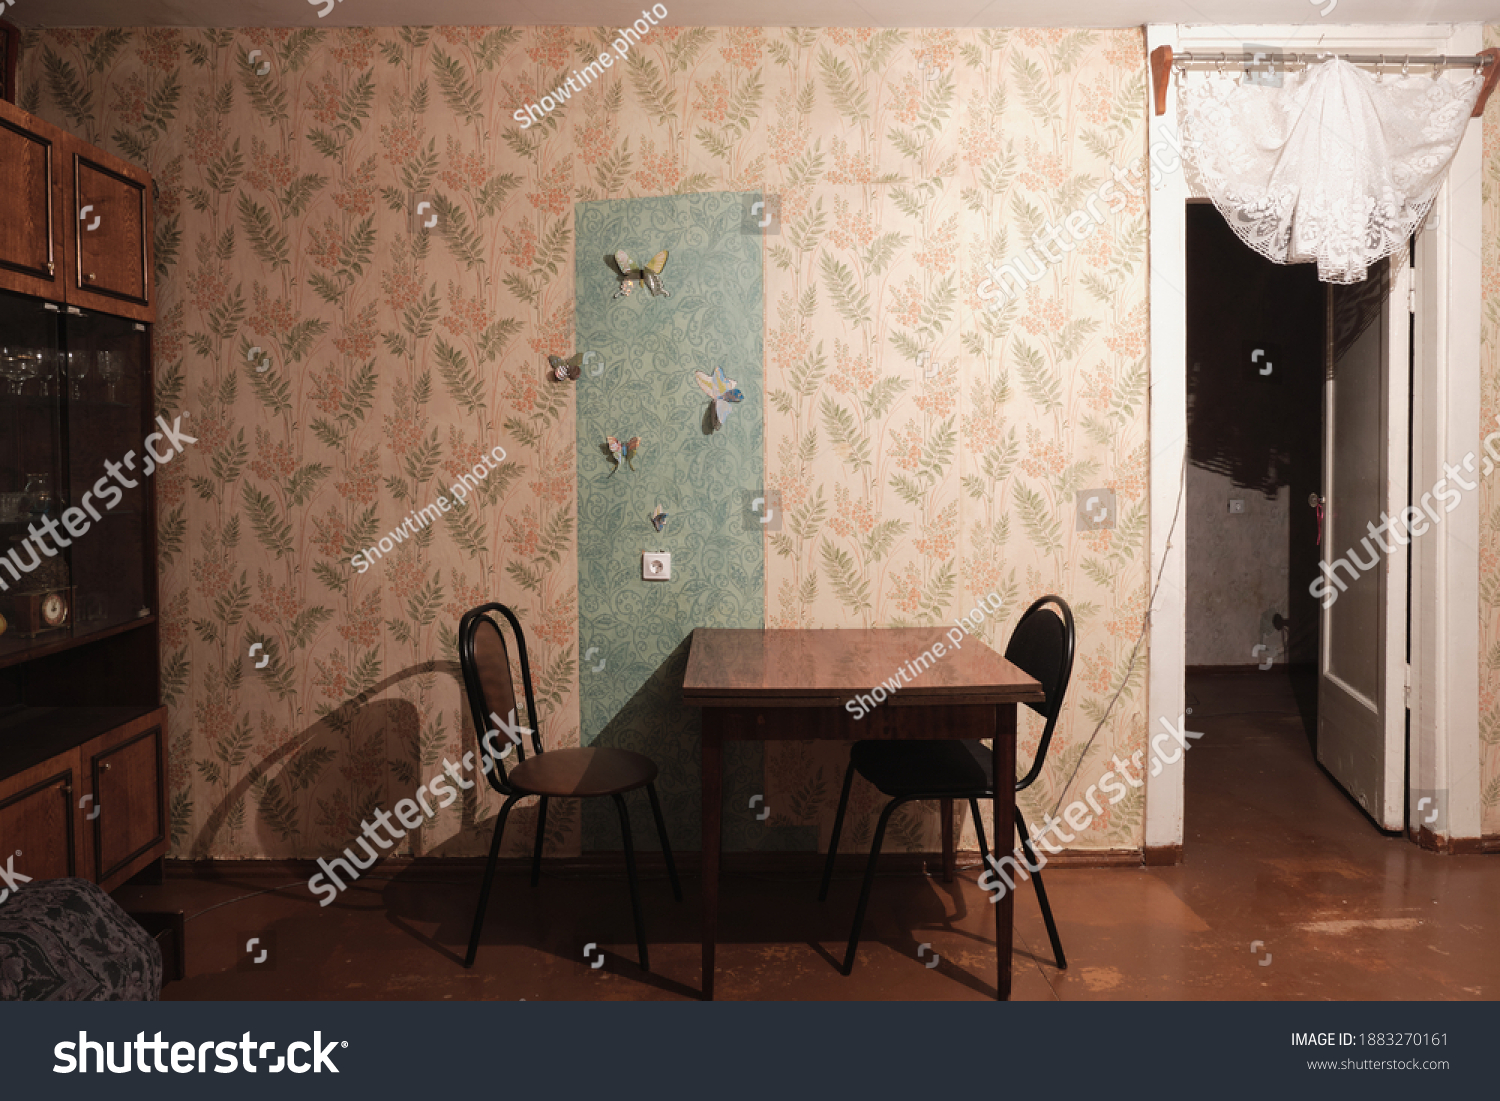 Example of Old Soviet Russian poor interior in Khruschev House. Aged  sideboard, table, chairs, sofa. Shabby floor. Tattered wallpaper on the wall. Paper butterflies as decor. Apartment of pensioners. #1883270161